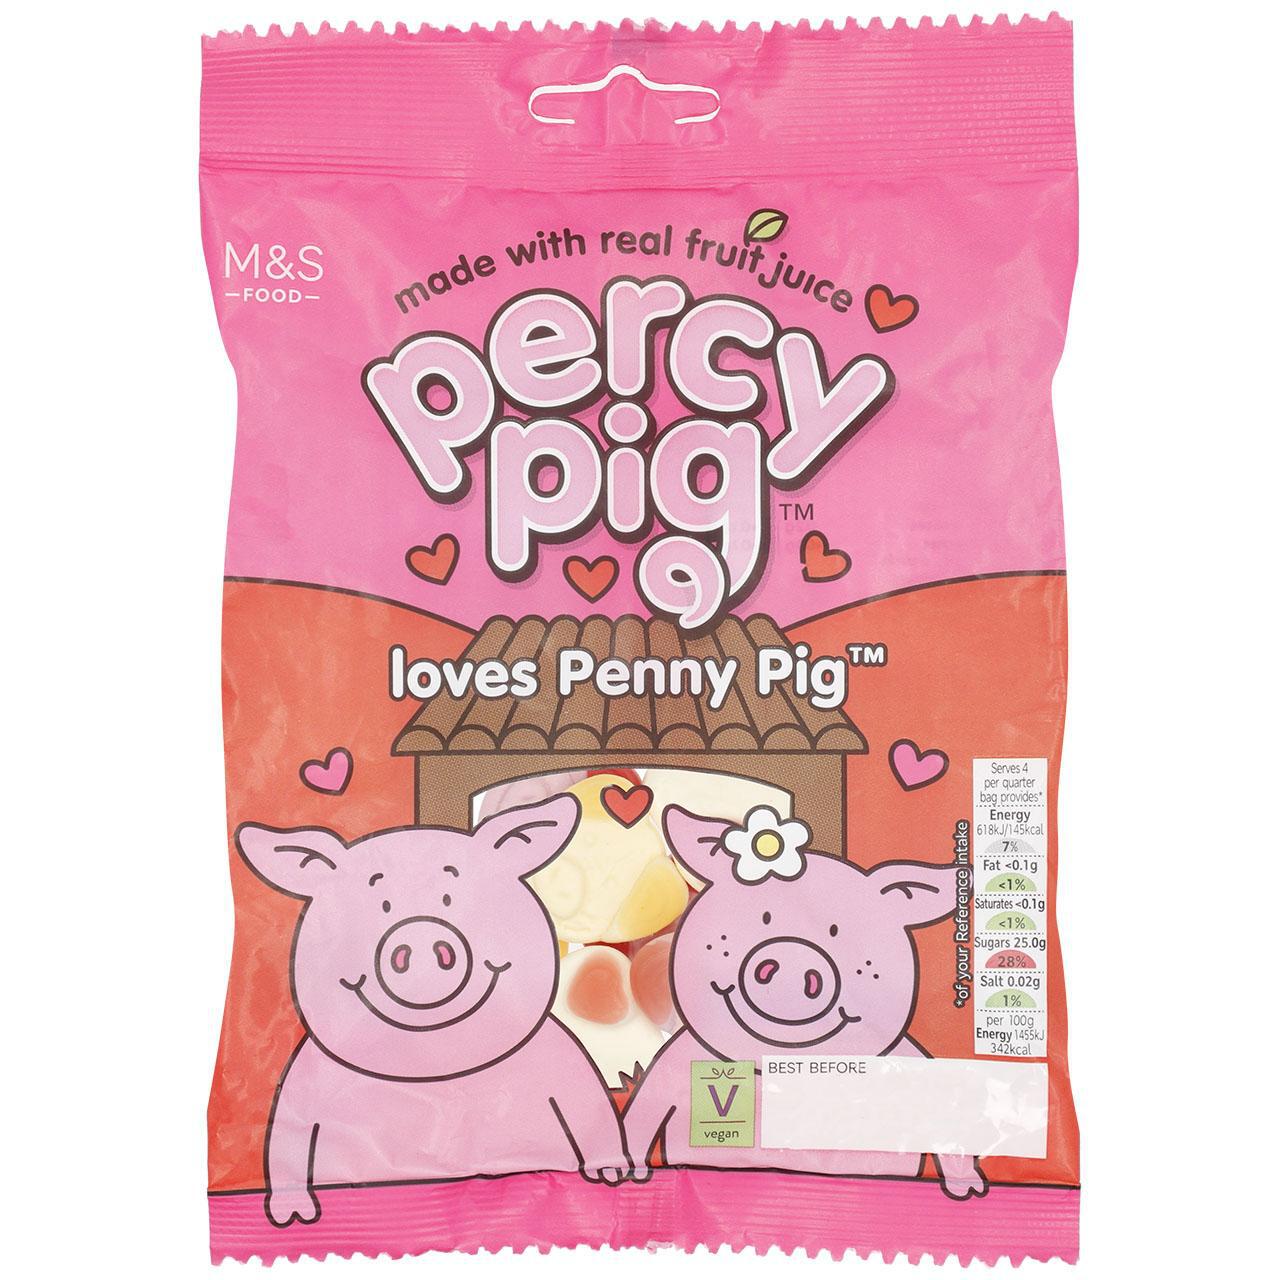 M&S Percy Pig Loves Penny Fruit Gums 170g